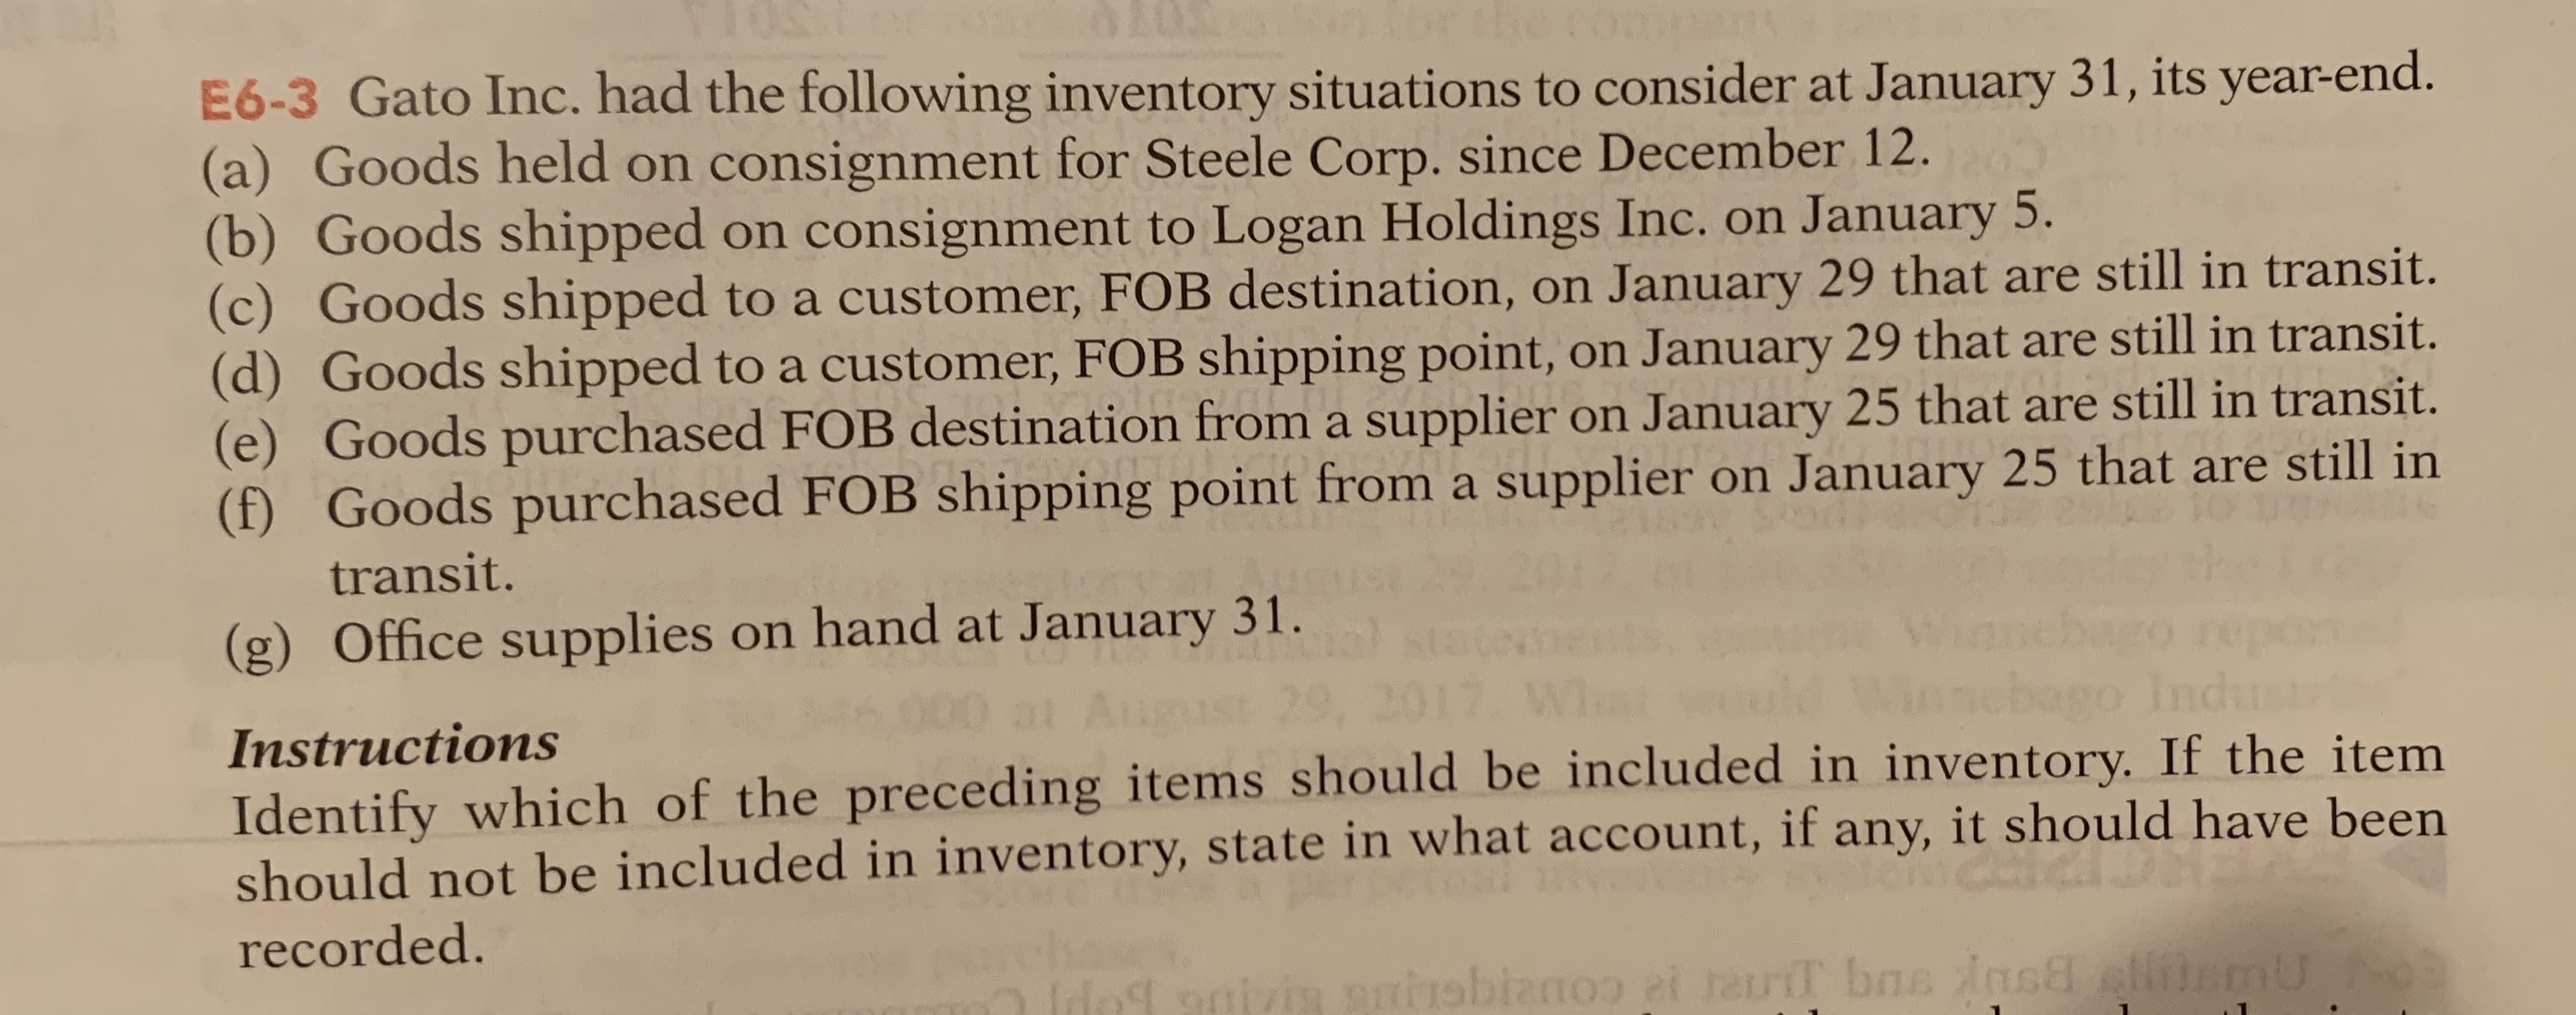 E6-3 Gato Inc. had the following inventory situations to consider at January 31, its year-end.
(a) Goods held on consignment for Steele Corp. since December 12.
b) Goods shipped on consignment to Logan Holdings Inc. on January 5.
(c) Goods shipped to a customer, FOB destination, on January 29 that are still in transit.
(d) Goods shipped to a customer, FOB shipping point, on January 29 that are still in transit.
(e) Goods purchased FOB destination from a supplier on January 25 that are still in transit.
(f) Goods purchased FOB shipping point from a supplier on January 25 that are still in
transit.
(g) Office supplies on hand at January 31.
000 at Augus
bago Inc
dust
29, 2017.
Instructions
Identify which of the preceding items should be included in inventory. If the item
should not be included in inventory, state in what account, if any, it should have been
recorded.
9ivin rbizno i teriT bas ins lemU
